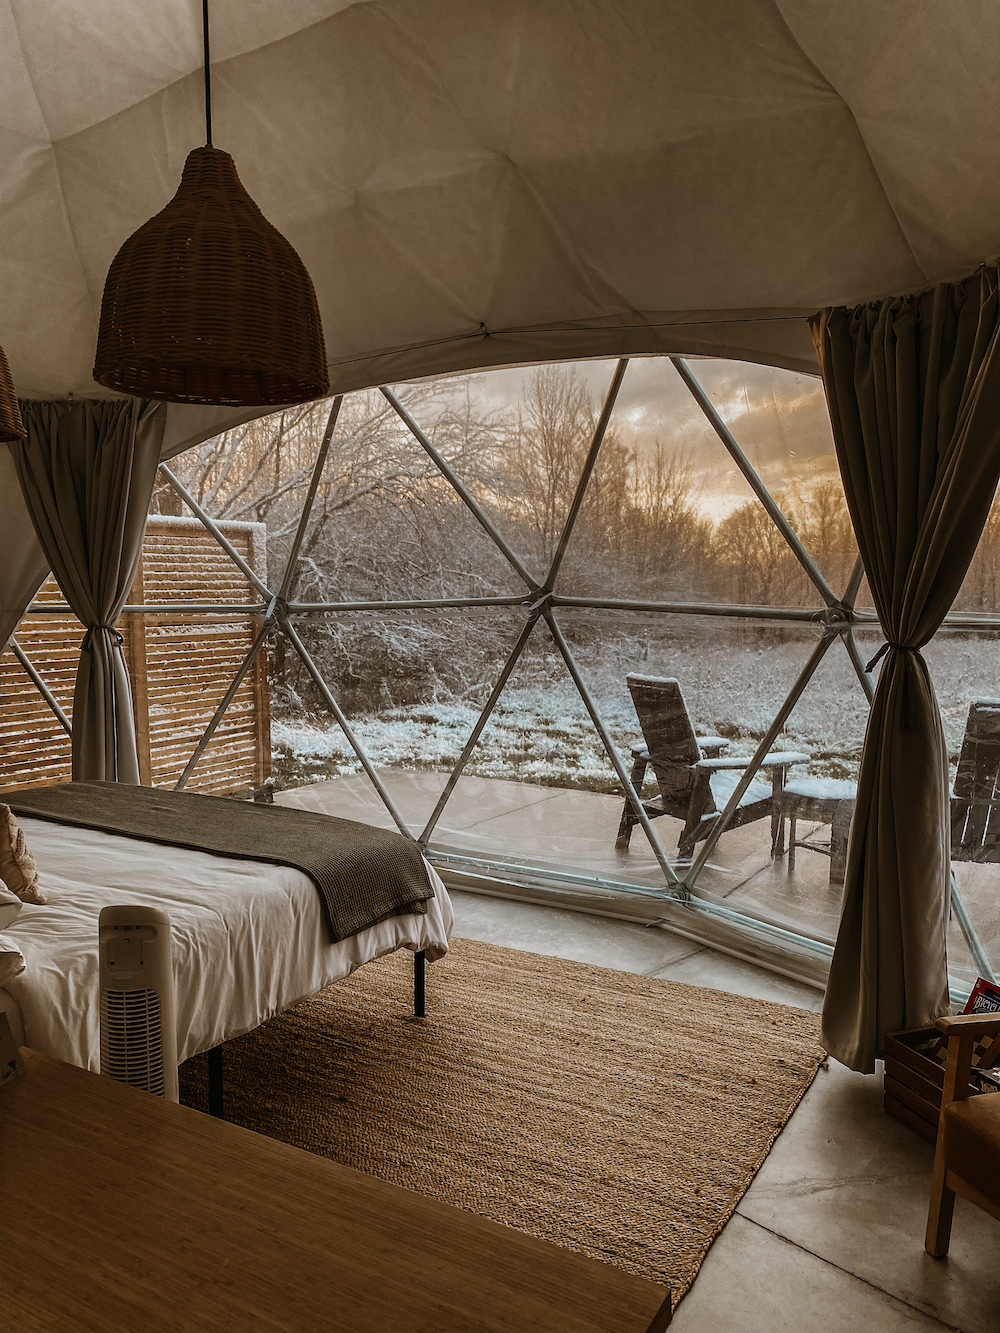 View from inside glamping dome of wintry day.